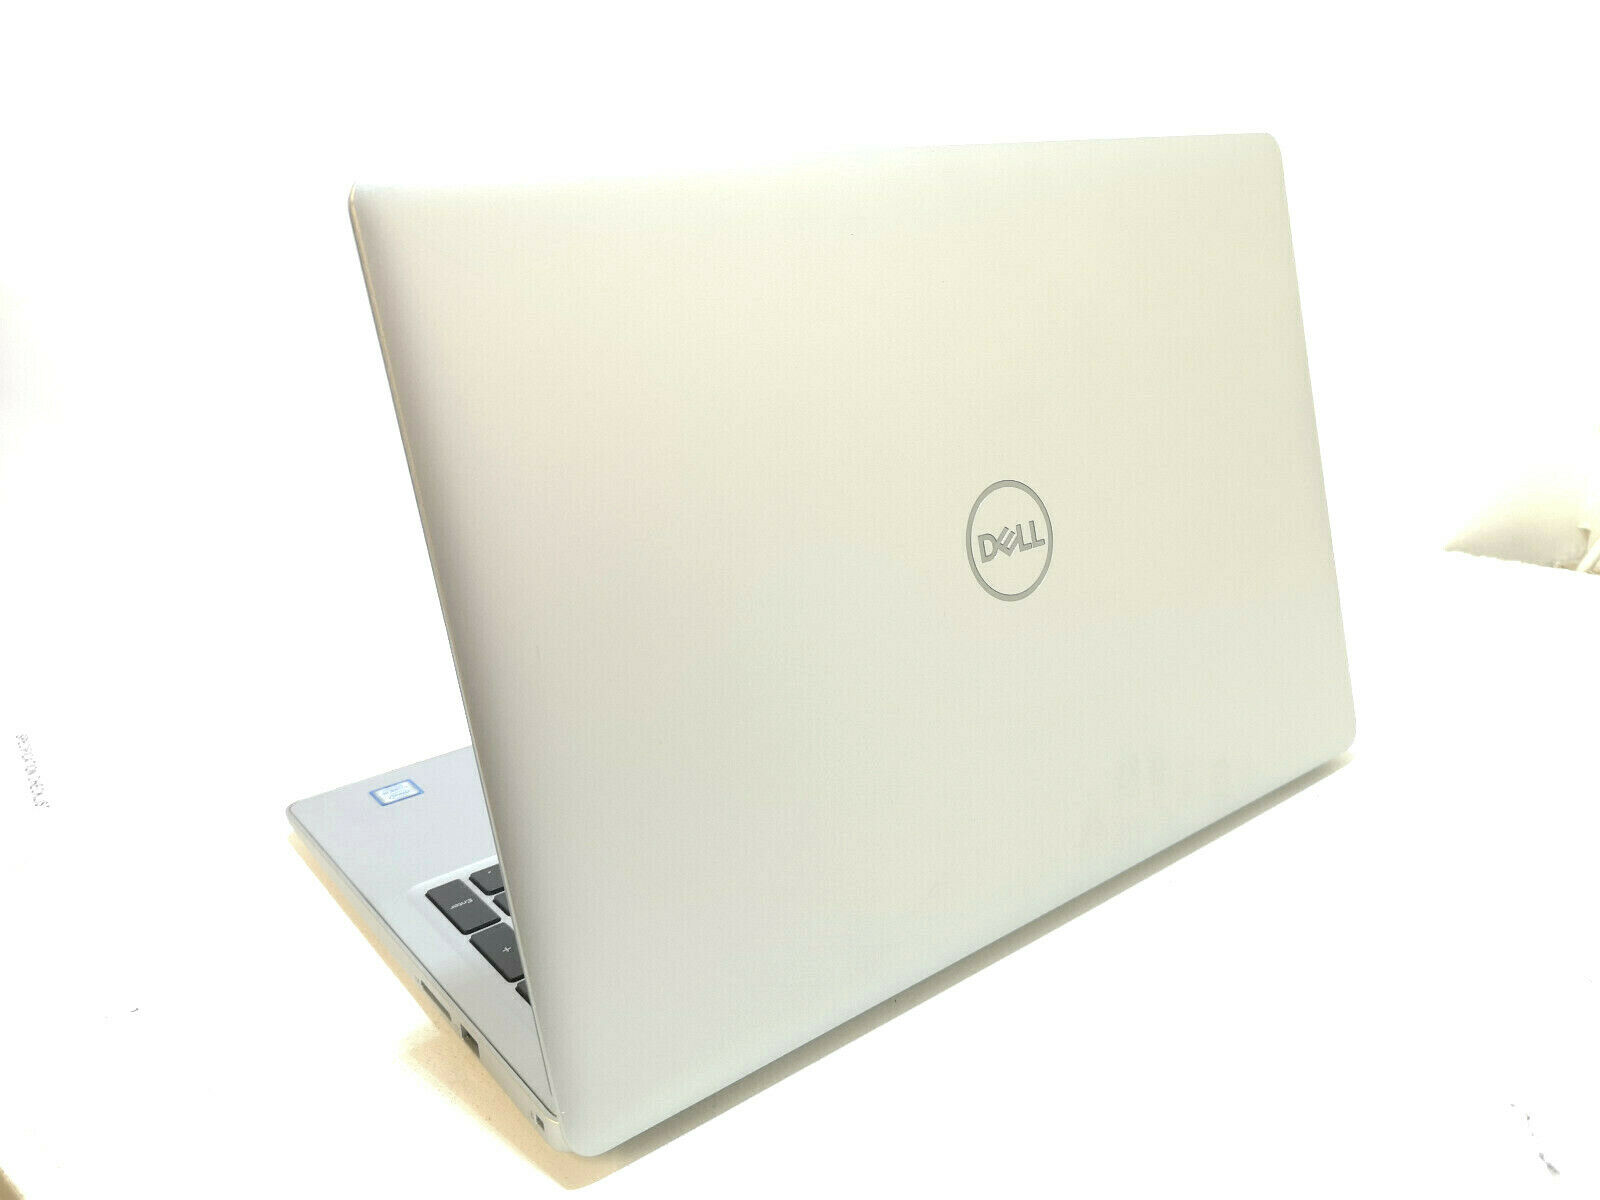 Refurbished Dell Inspiron 5570 Laptop PC